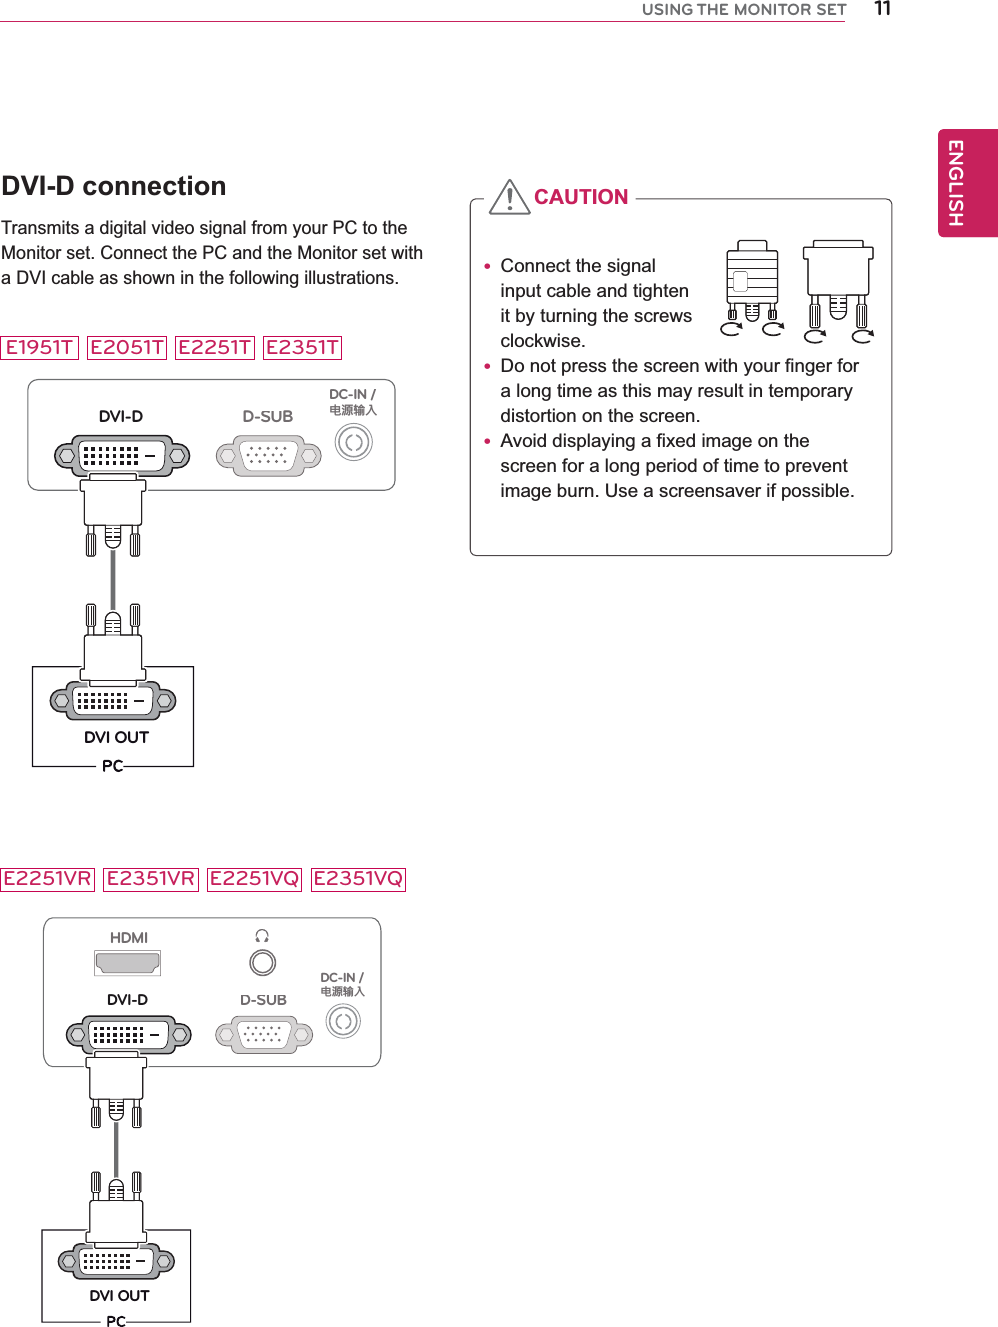 11ENGENGLISHUSING THE MONITOR SETDVI-D connectionTransmits a digital video signal from your PC to the Monitor set. Connect the PC and the Monitor set with a DVI cable as shown in the following illustrations.D-SUBDVI-DDVI OUTDC-IN /䏳㵎幑‣HDMID-SUBDVI-DDVI OUTDC-IN /䏳㵎幑‣y Connect the signal input cable and tighten it by turning the screws clockwise.y Do not press the screen with your finger for  a long time as this may result in temporary distortion on the screen.y Avoid displaying a fixed image on the screen for a long period of time to prevent image burn. Use a screensaver if possible.CAUTIONE2051TE1951T E2251T E2351TE2251VR E2351VR E2251VQ E2351VQ